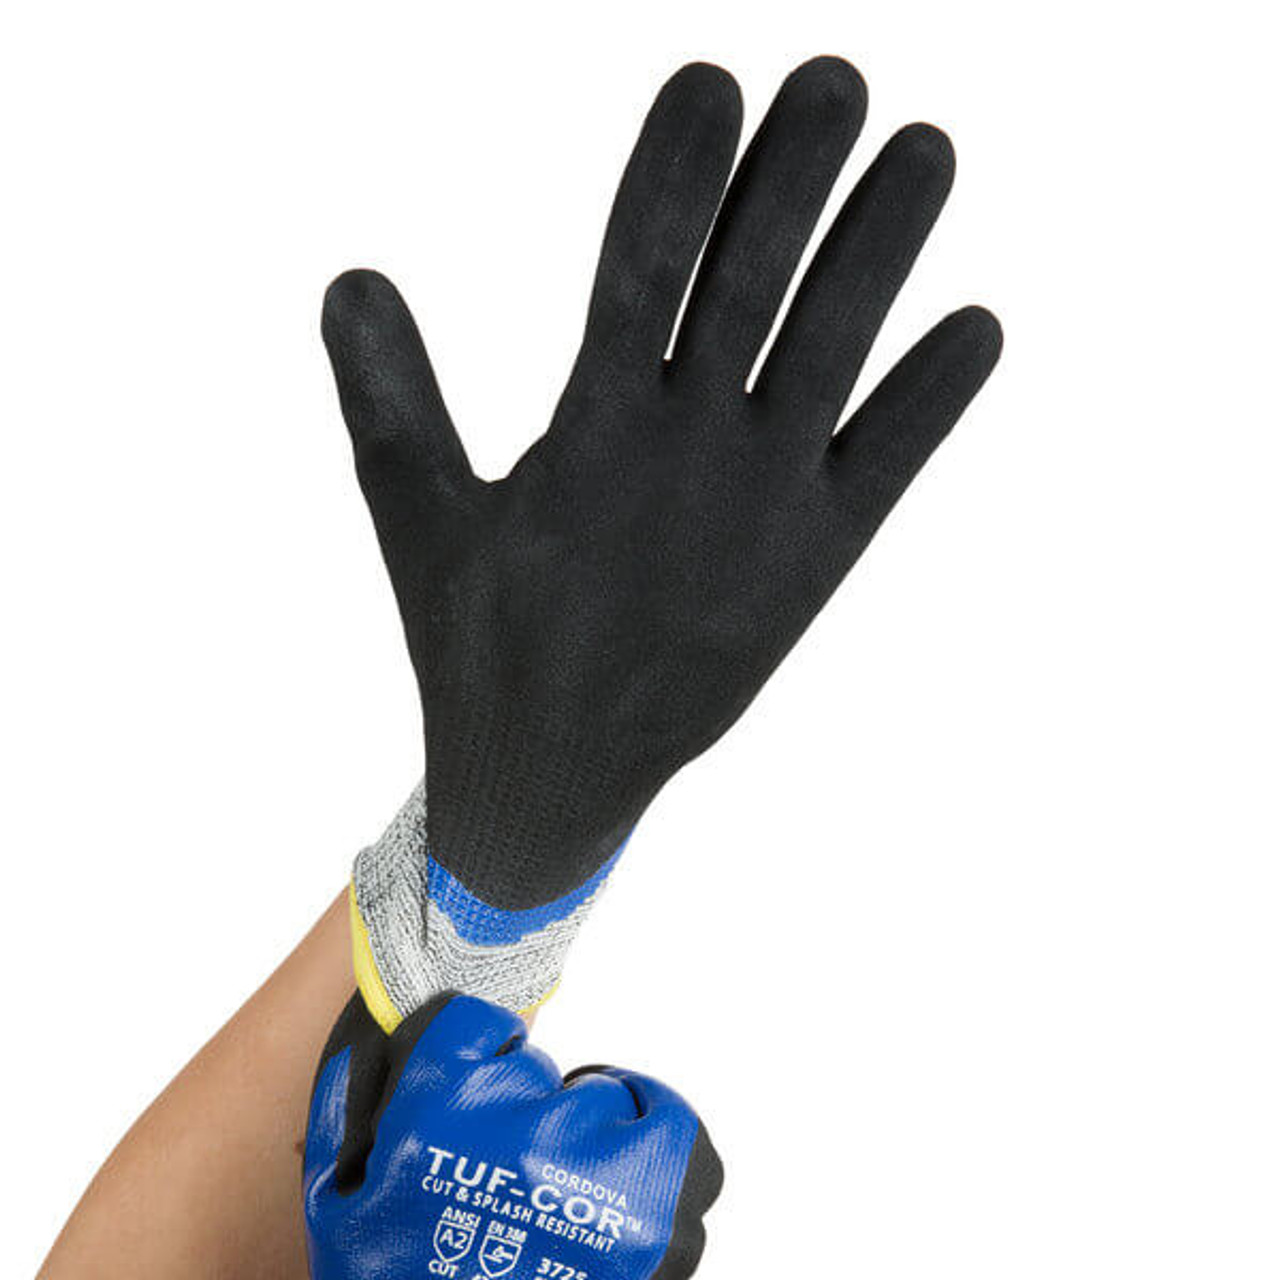 https://cdn11.bigcommerce.com/s-eokud1lf5m/images/stencil/1280x1280/products/1303/5768/cut-resistant-hppe-gloves-for-sharp-object__97975.1658159860.jpg?c=1